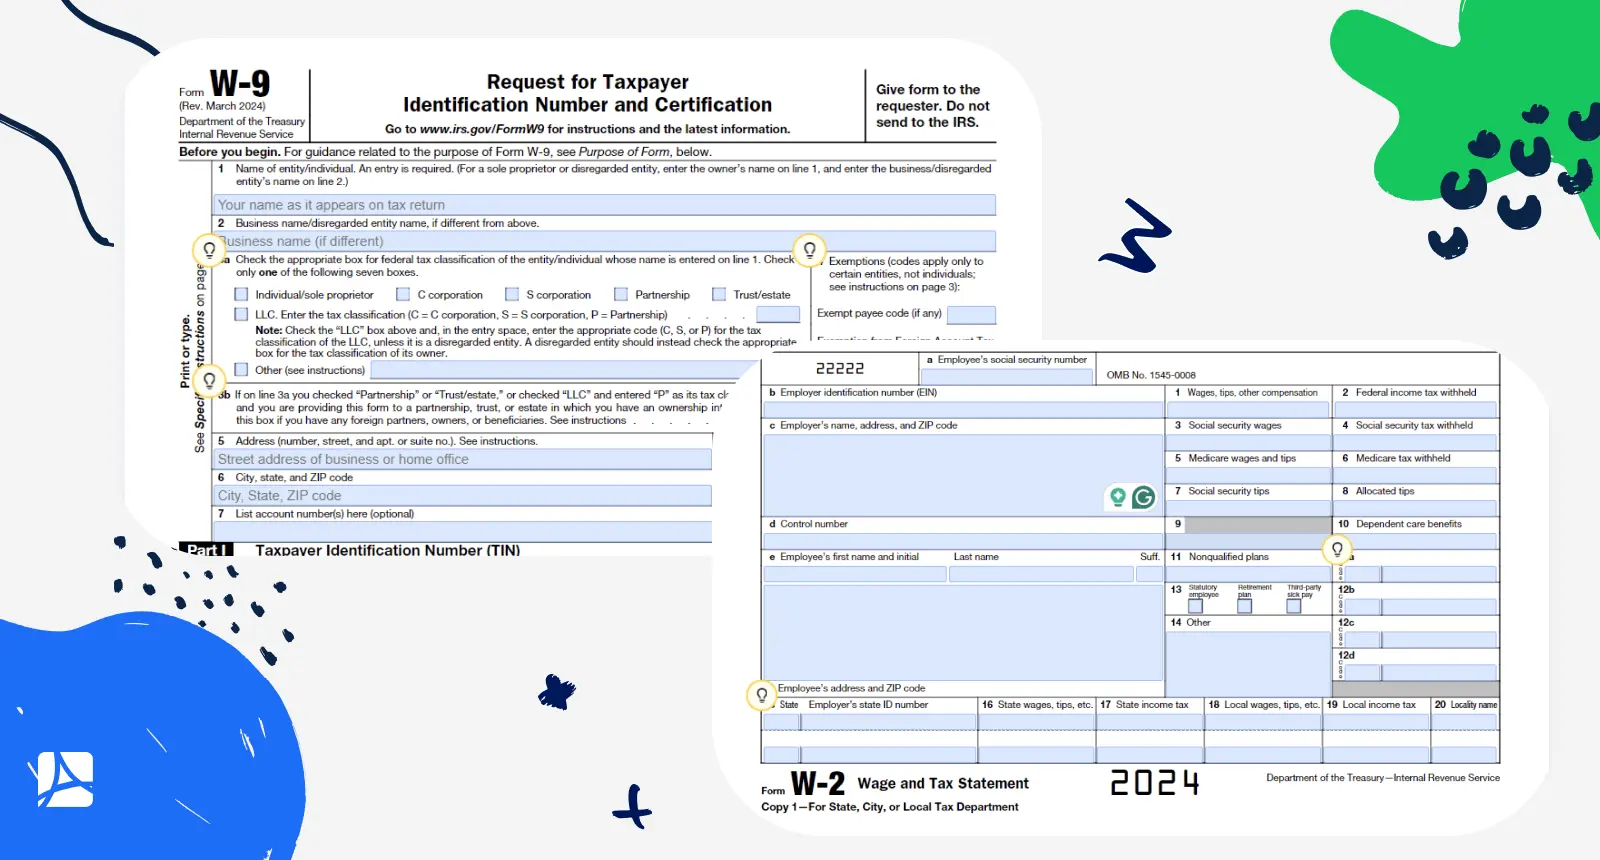 Screenshots of form W-9 and form W-2 on one picture